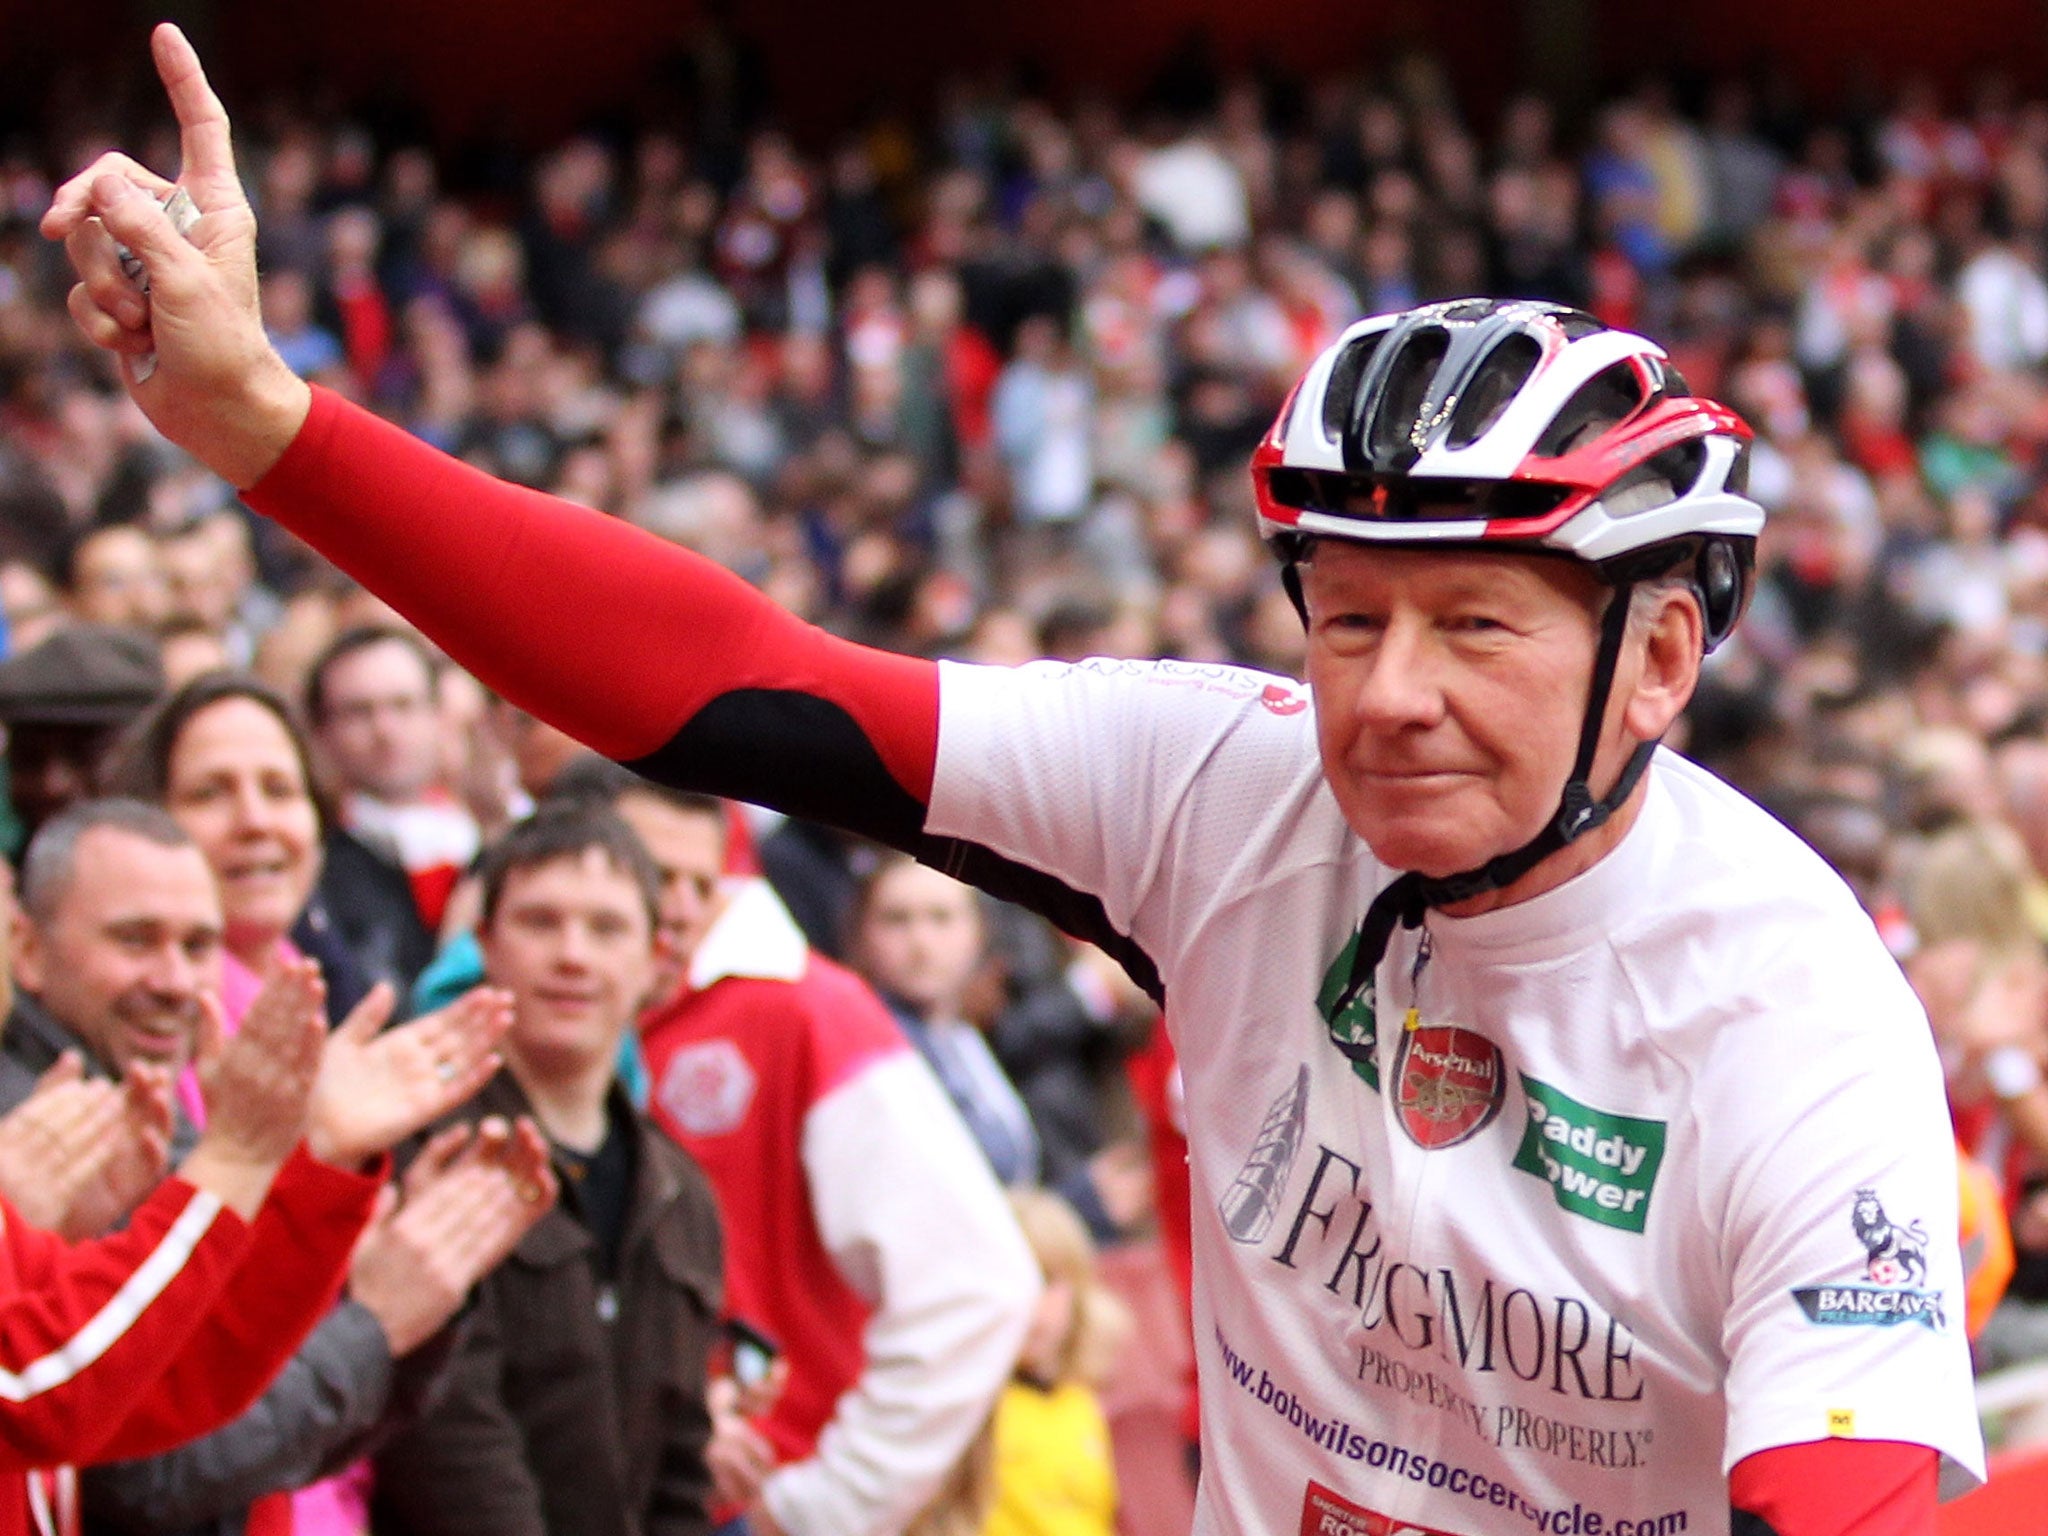 Former Arsenal goalkeeper Bob Wilson cycles around the Emirates Stadium to launch his 500 mile cycling challenge in April 2011